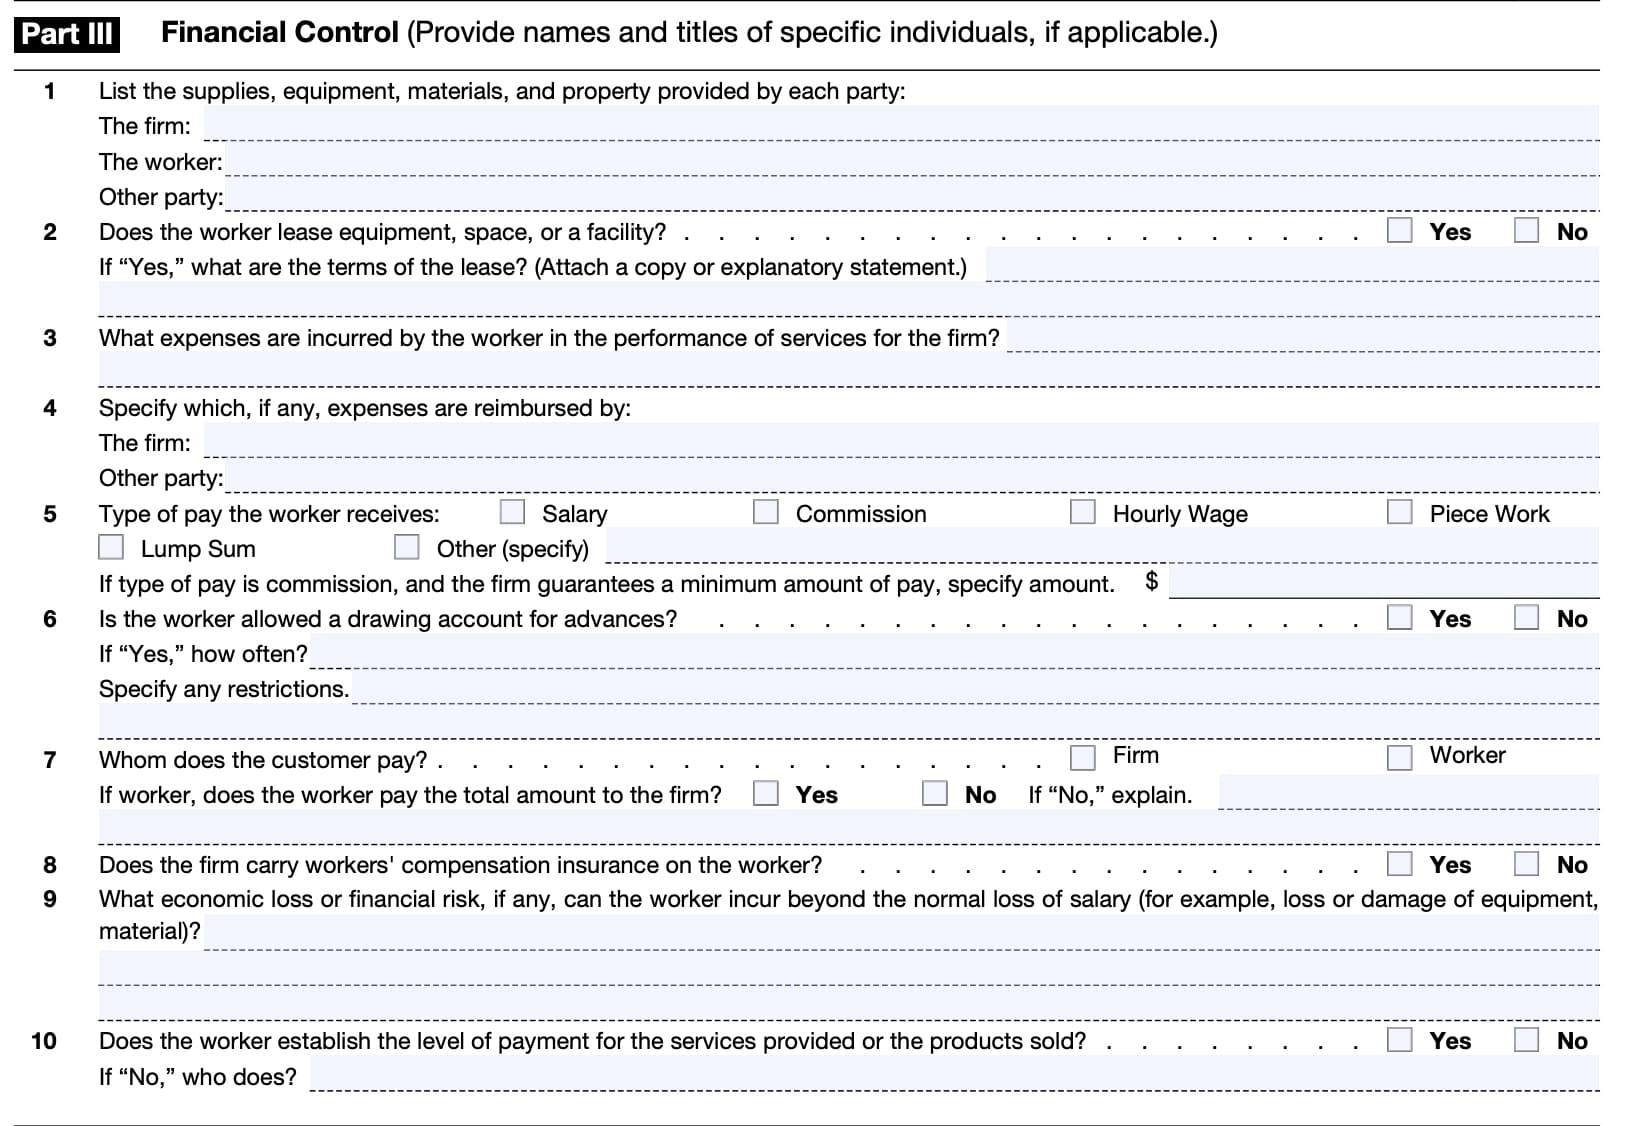 Form ss-8, part III: financial control